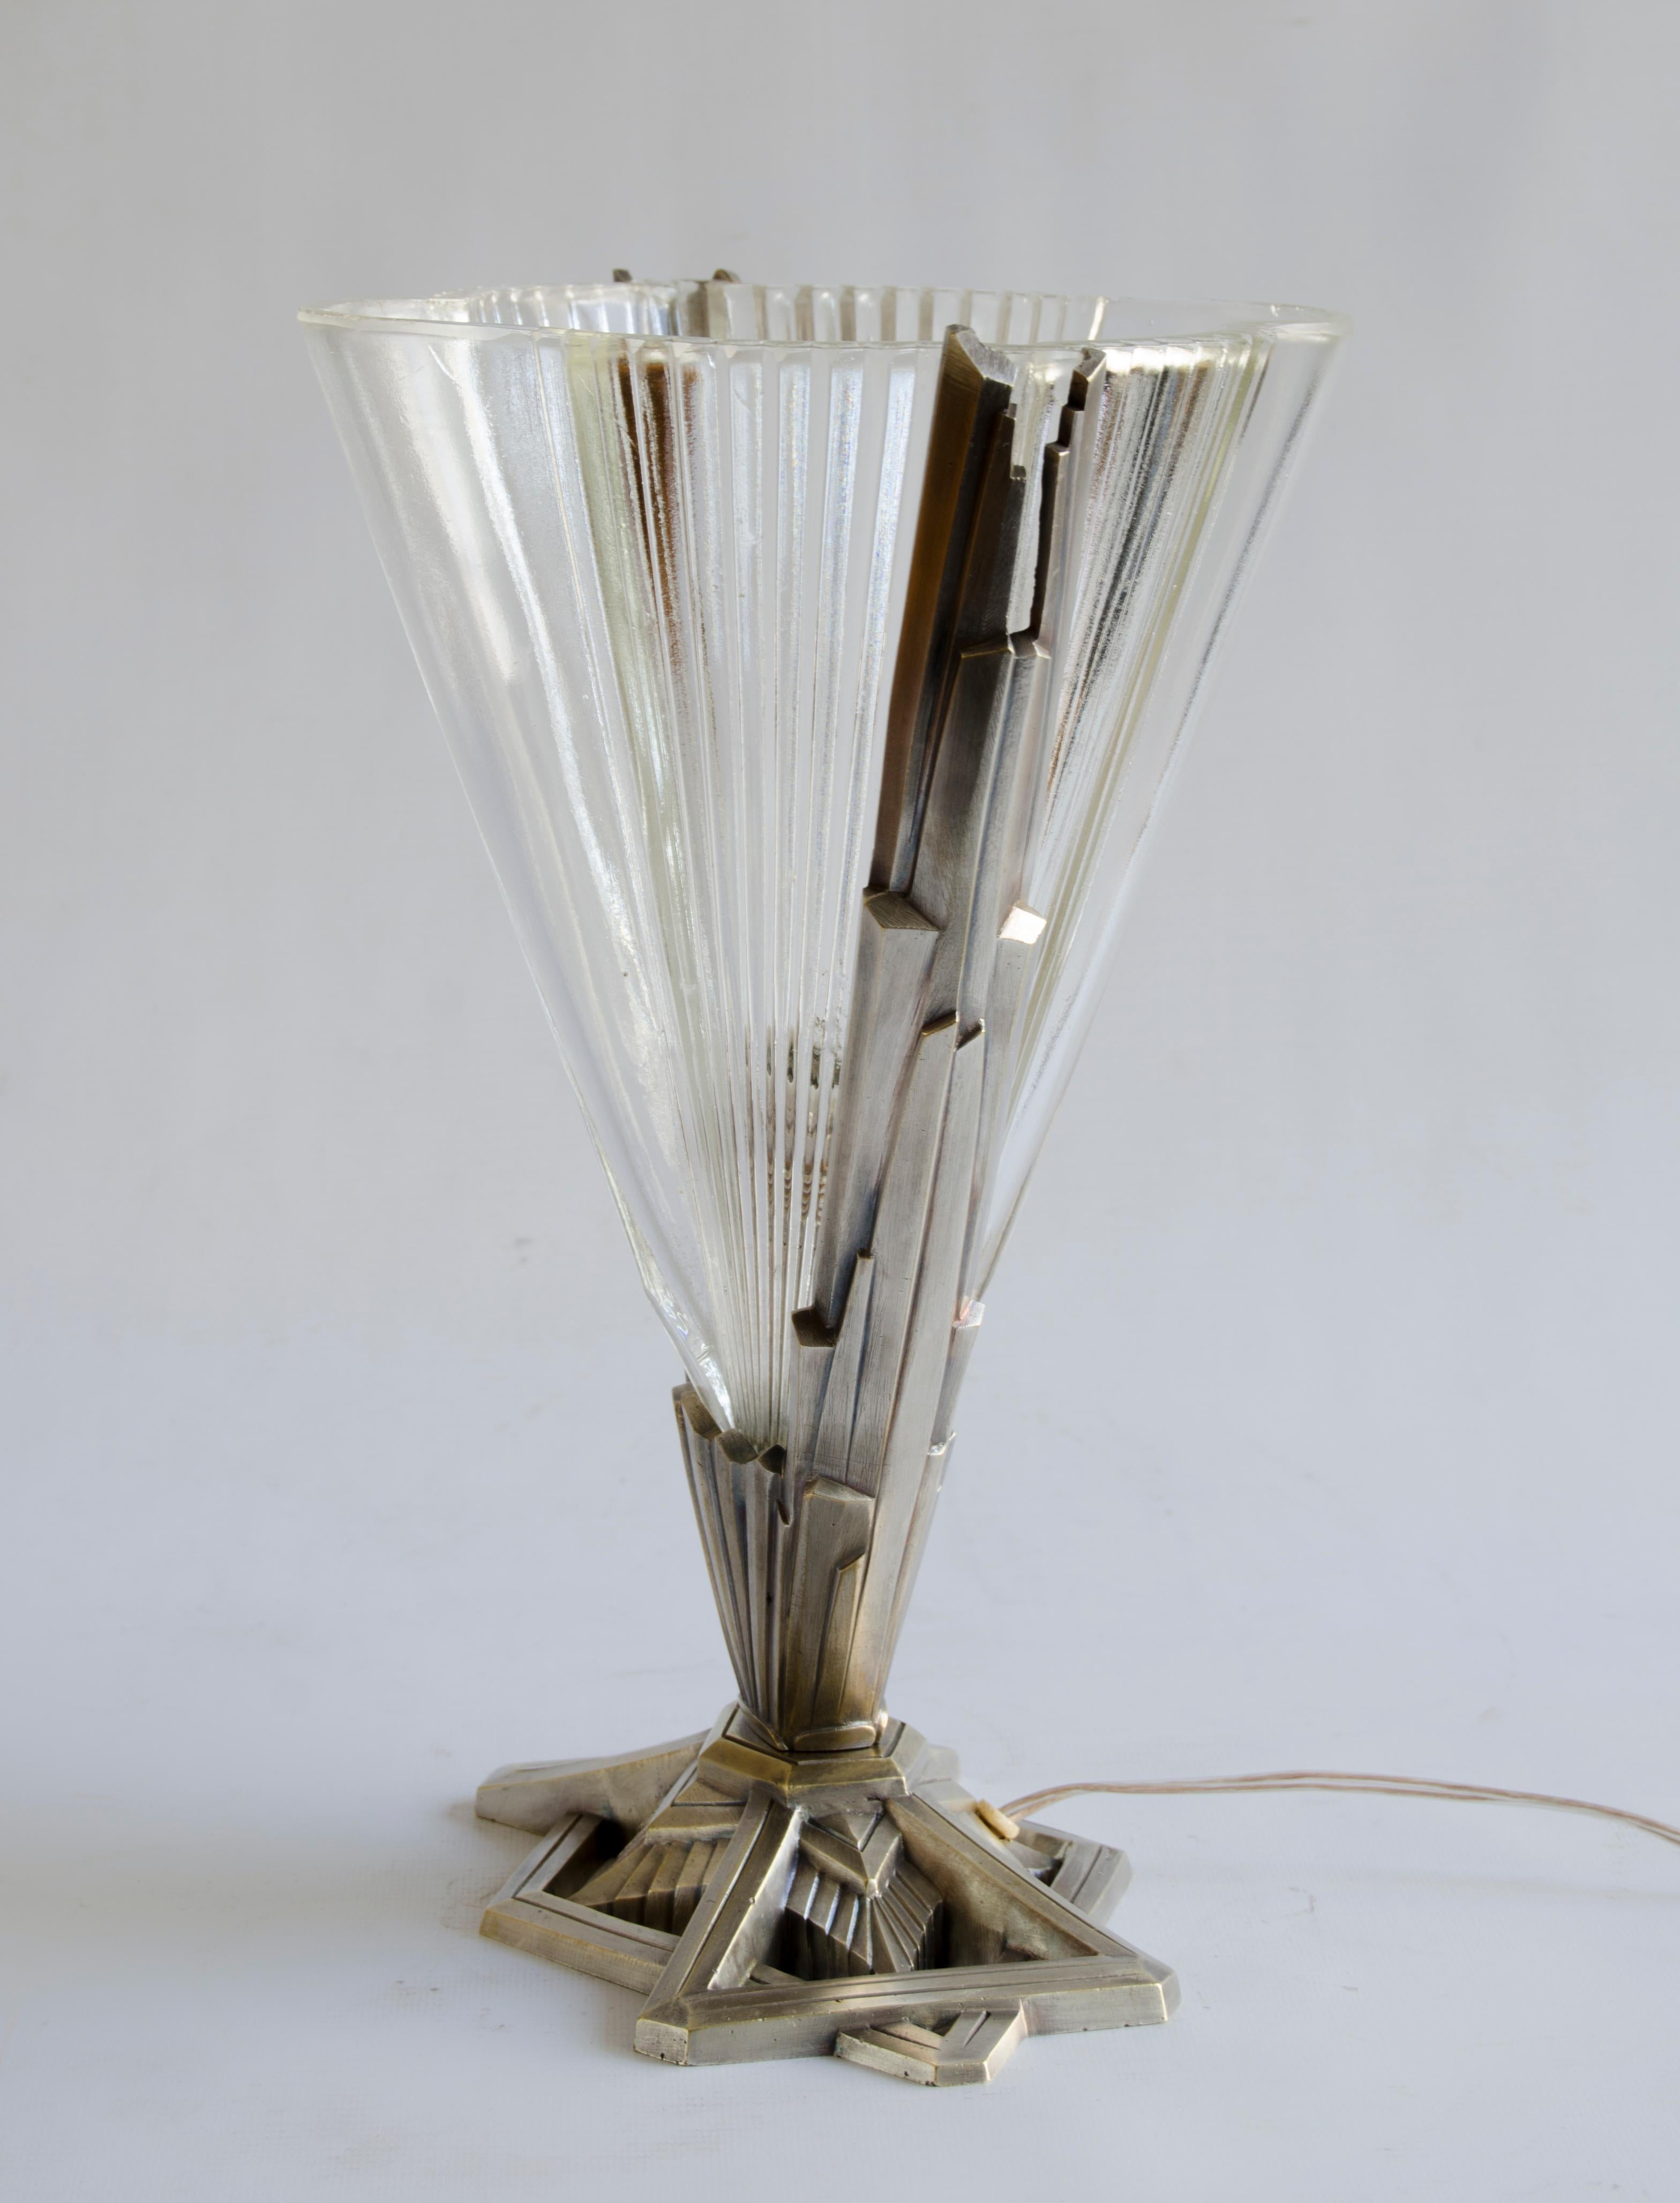 Art Deco table lamp (Sabino)
lamp circa 1920 formed Sabino (France)
electro plated bronze and glass
natural wear. Glass in perfect condition.